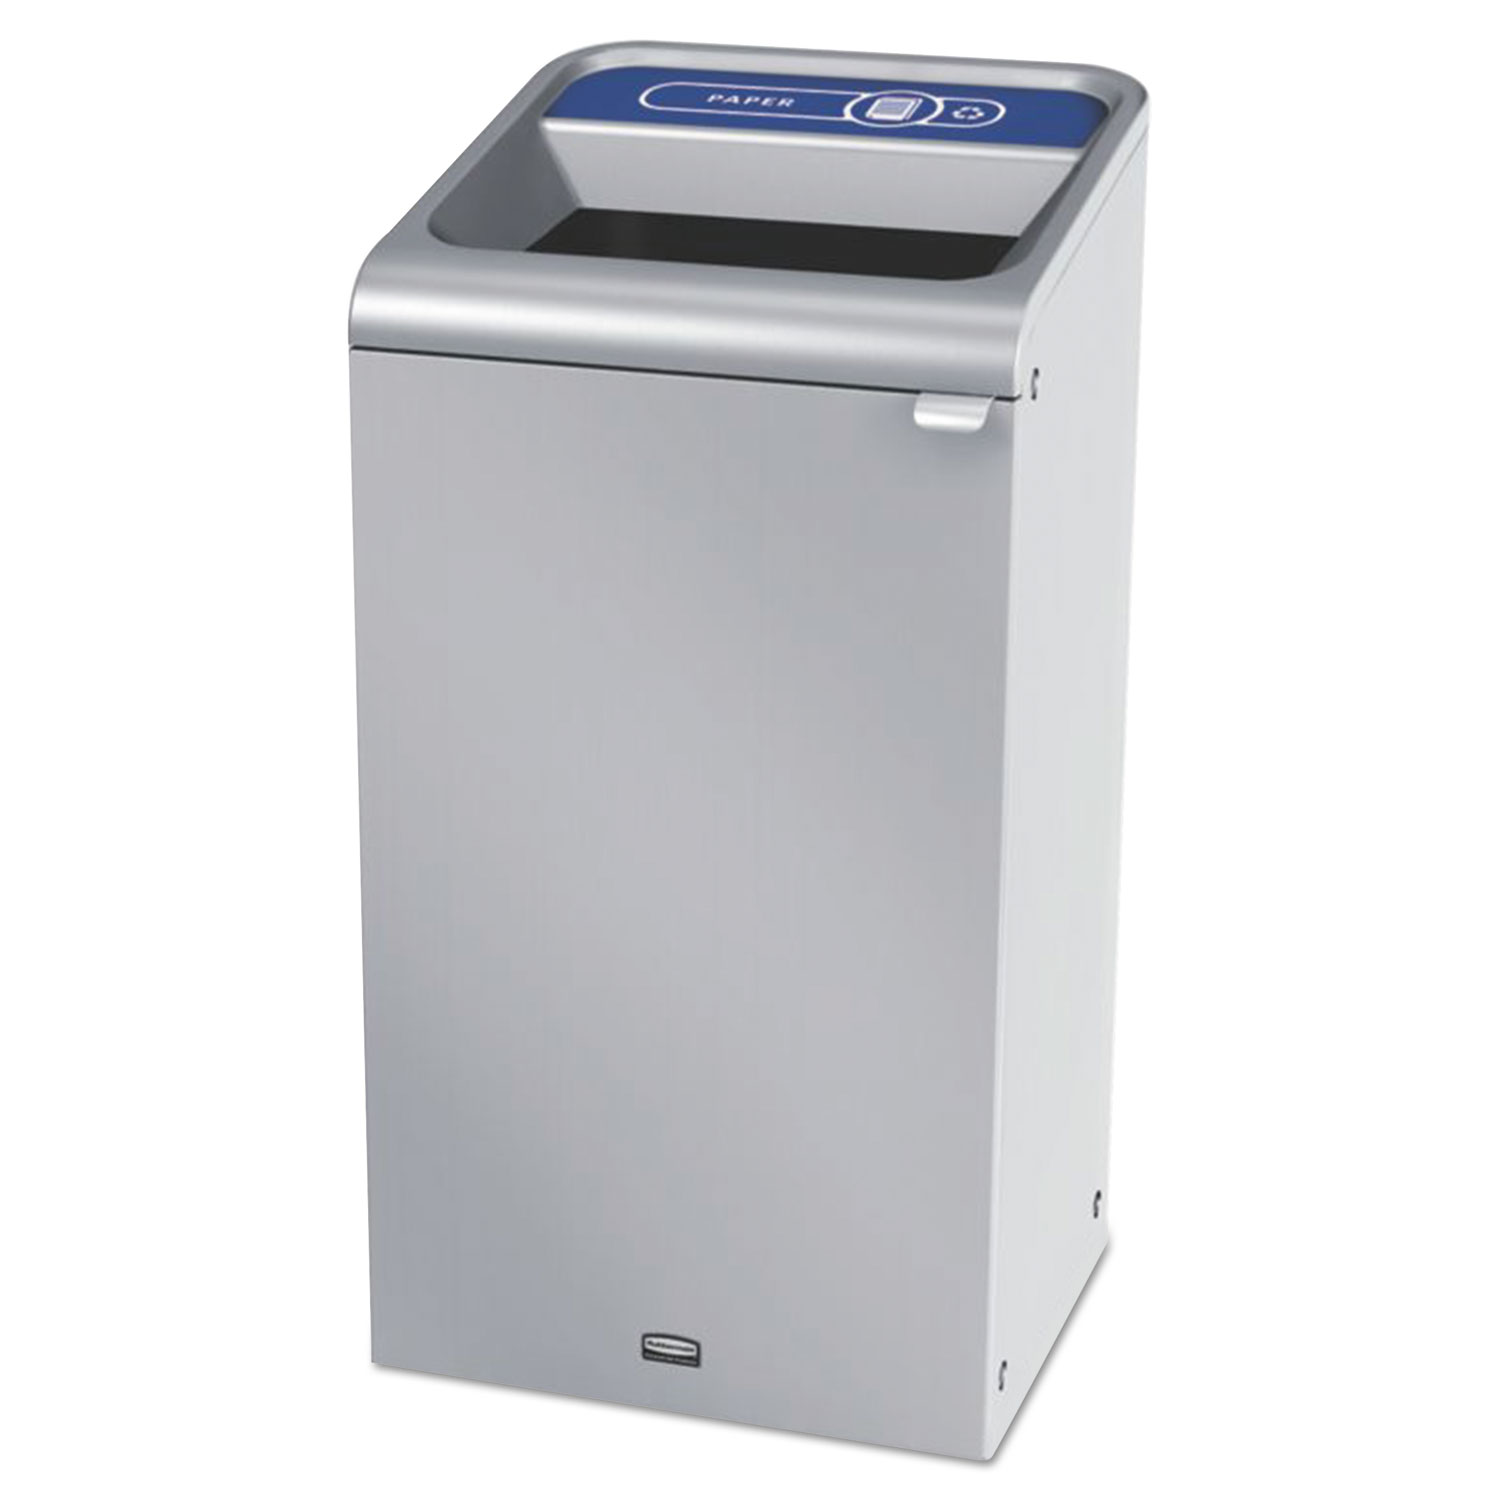 Configure Indoor Recycling Waste Receptacle, 23 gal, Stainless Steel, Paper